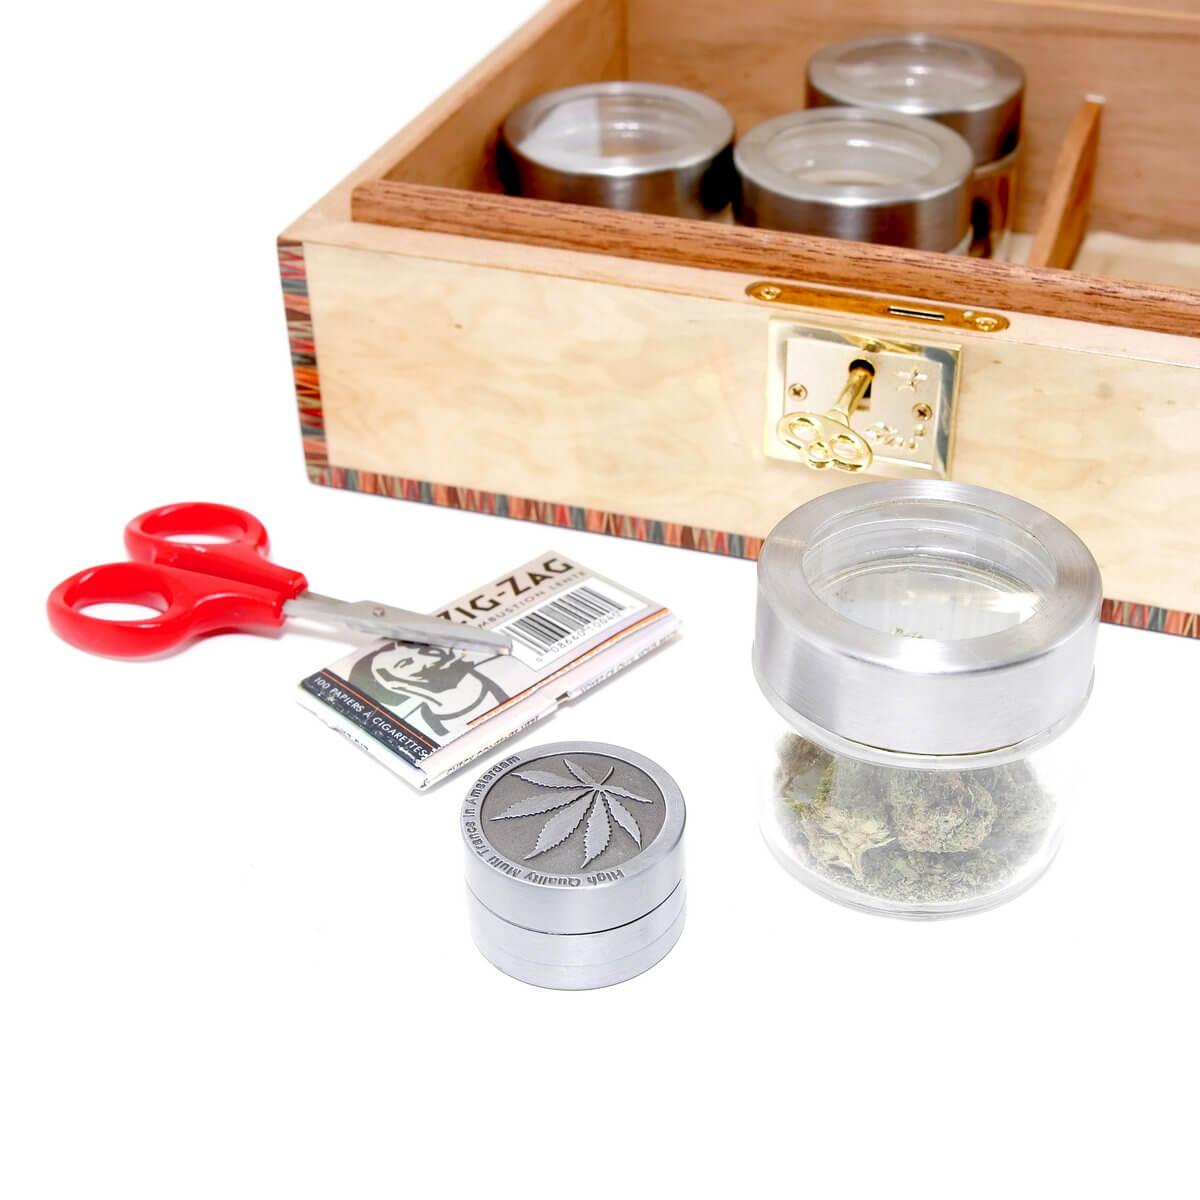 Why Are Cannabis Storage Humidors Important?